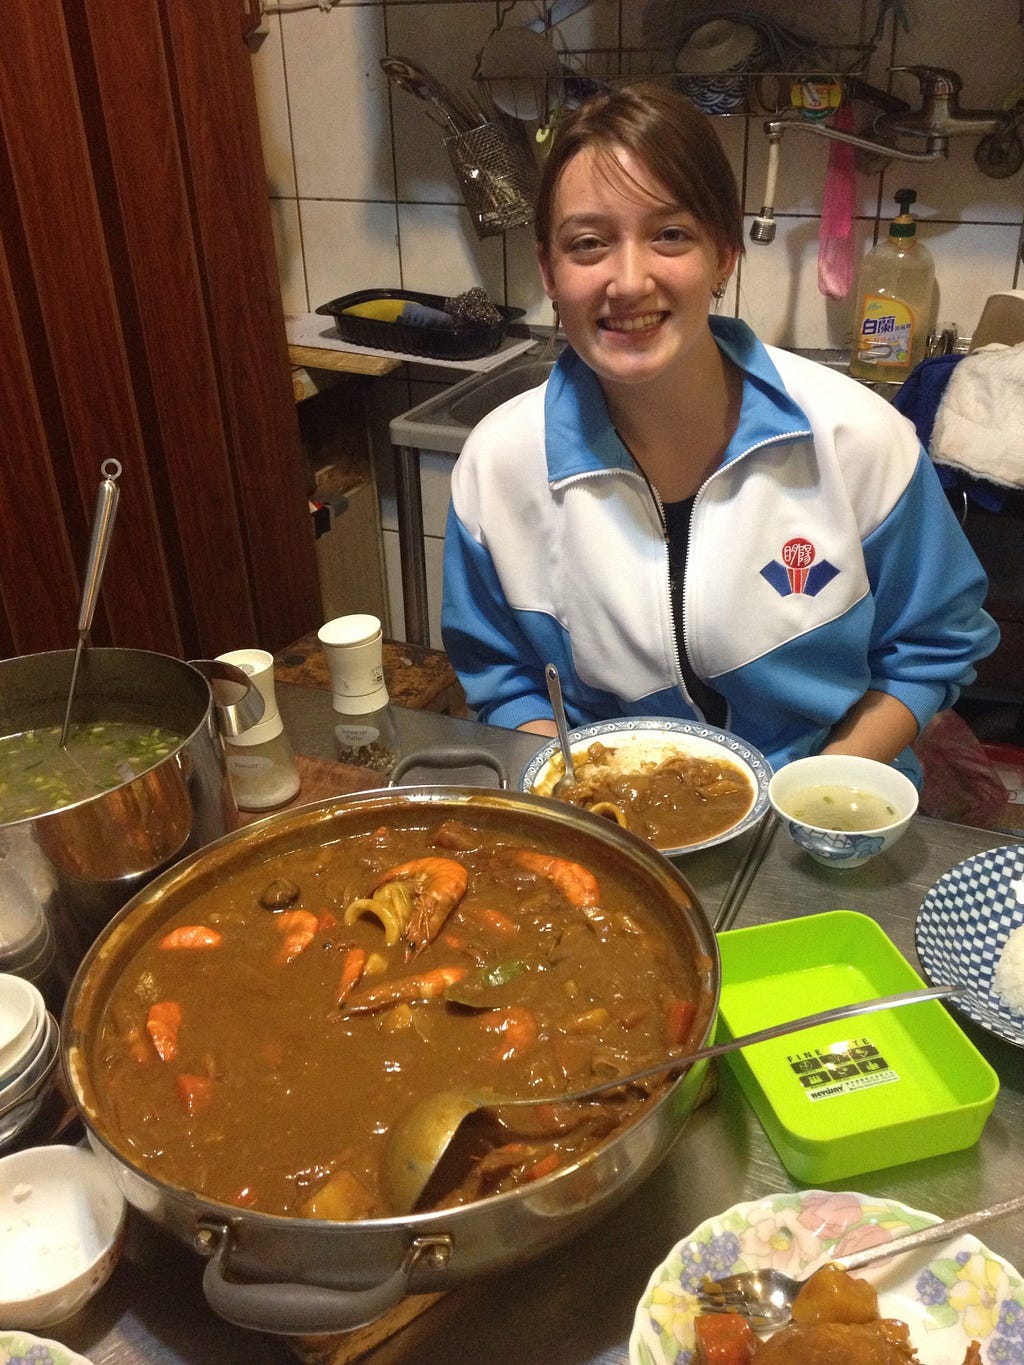 Megan smiles sitting at a table with a big pot of curry.